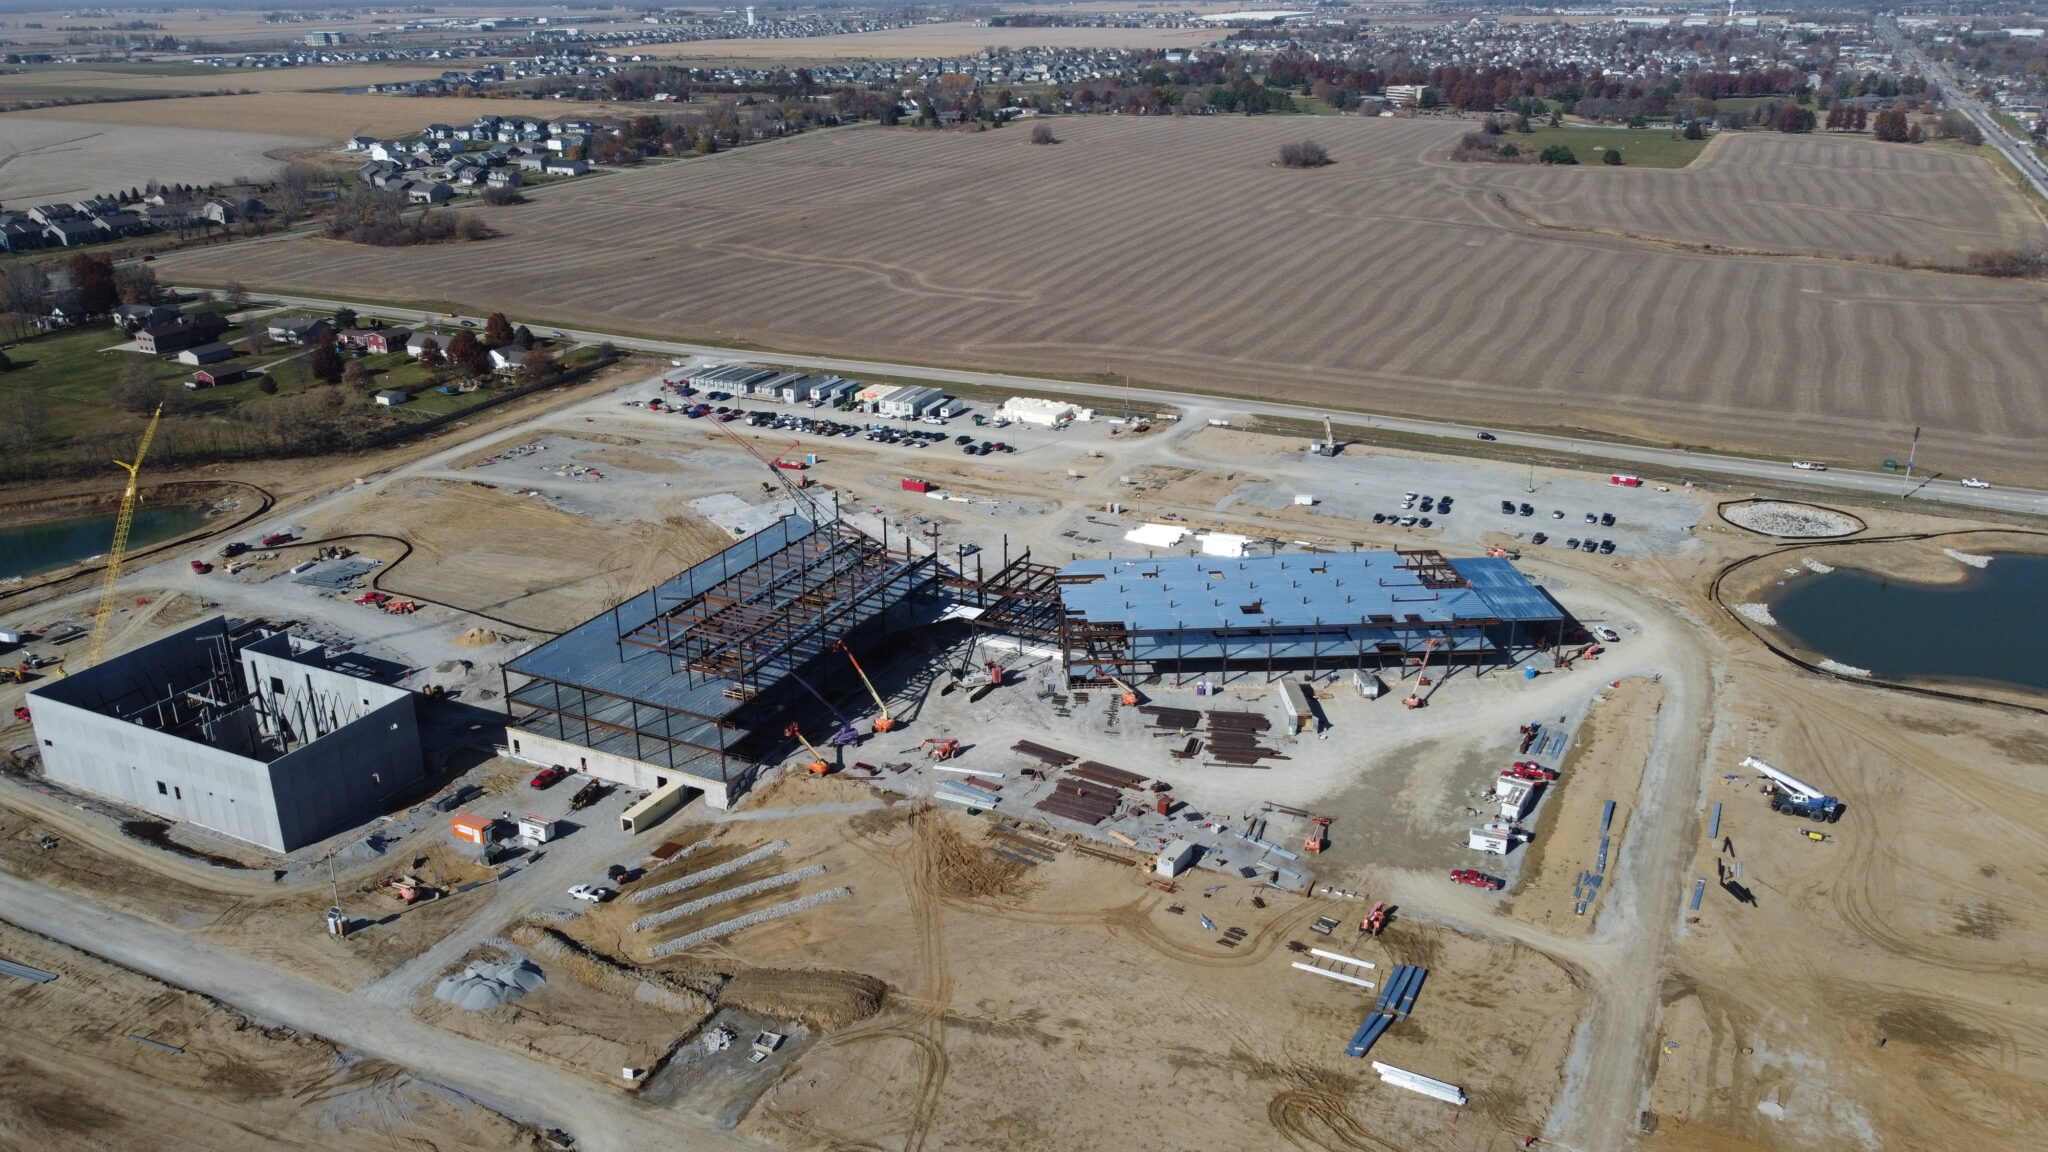 Construction of the University of Iowa Hospitals and Clinics campus in North Liberty